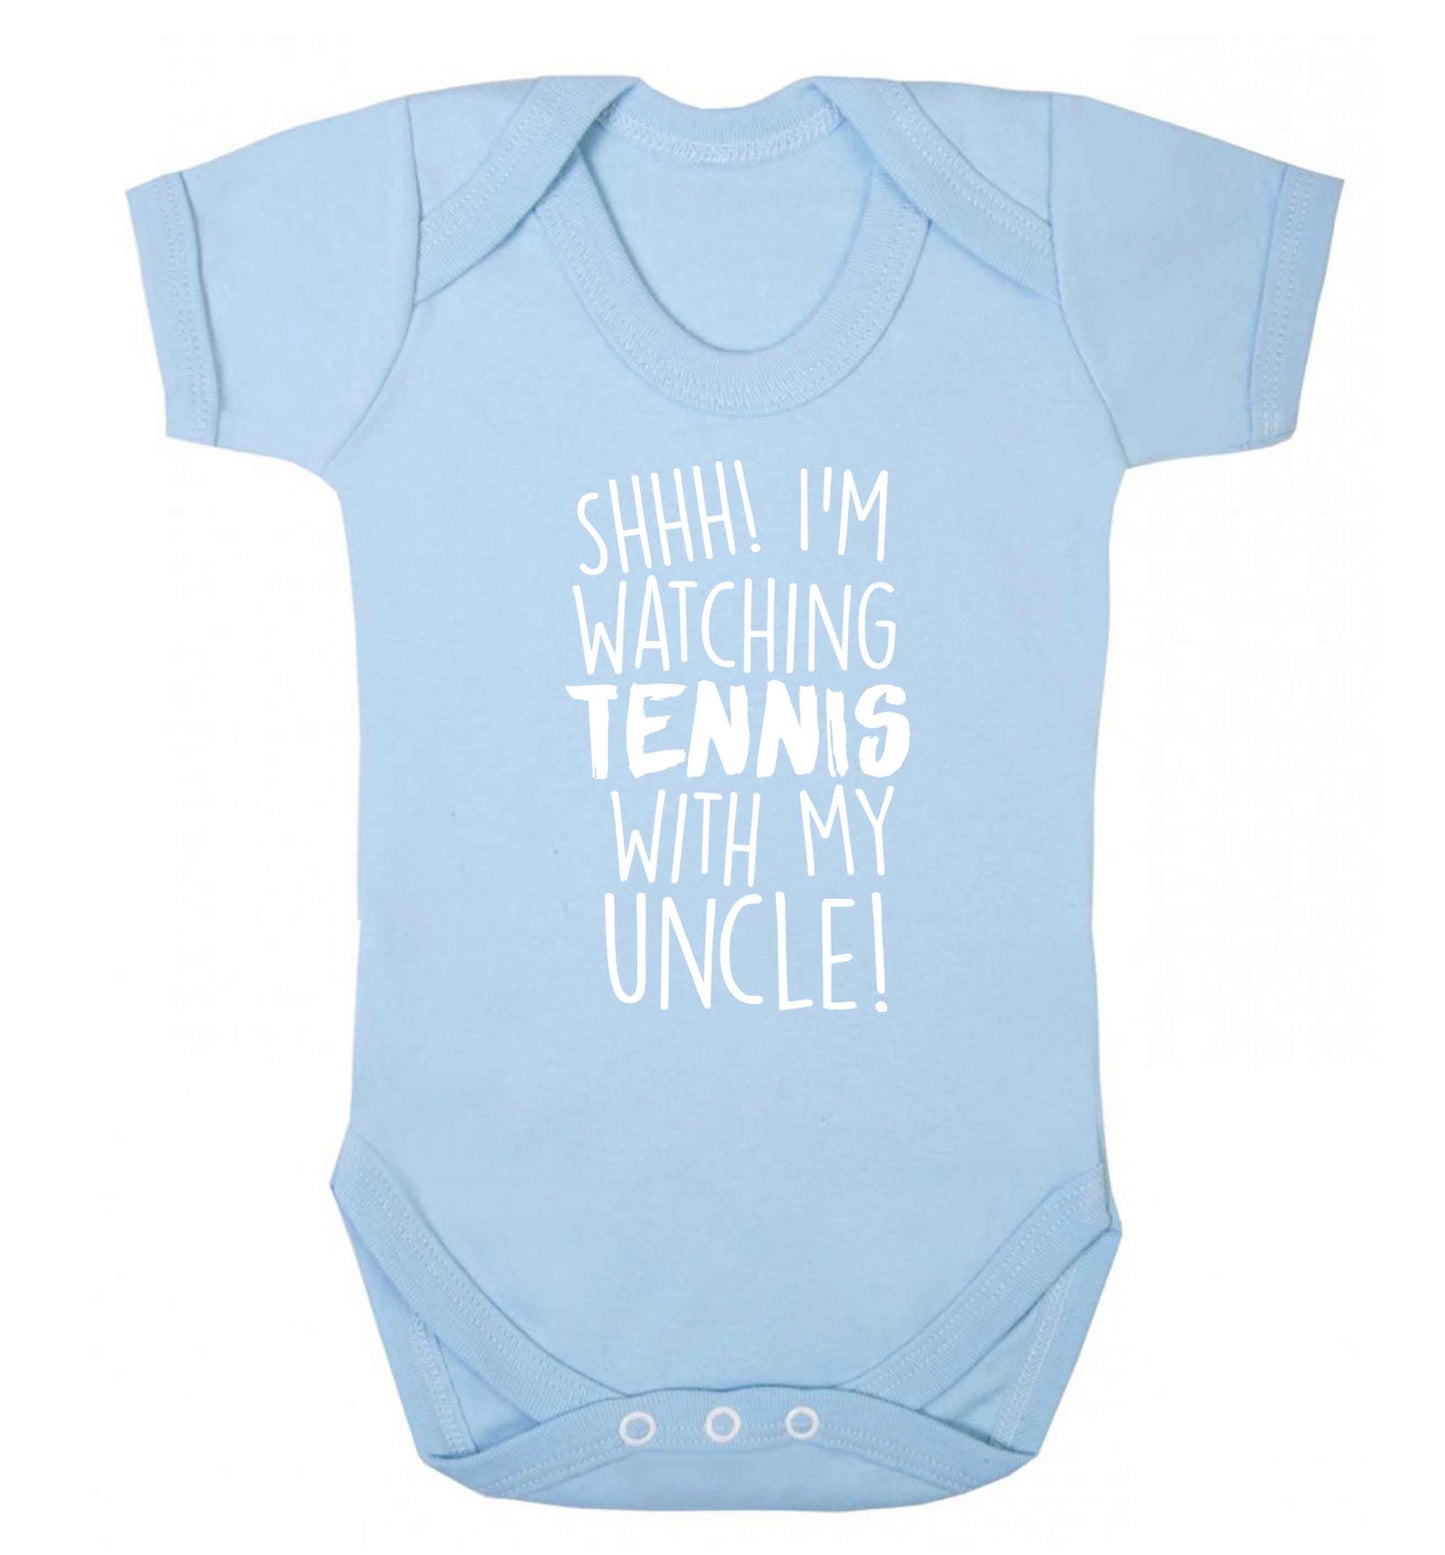 Shh! I'm watching tennis with my uncle! Baby Vest pale blue 18-24 months